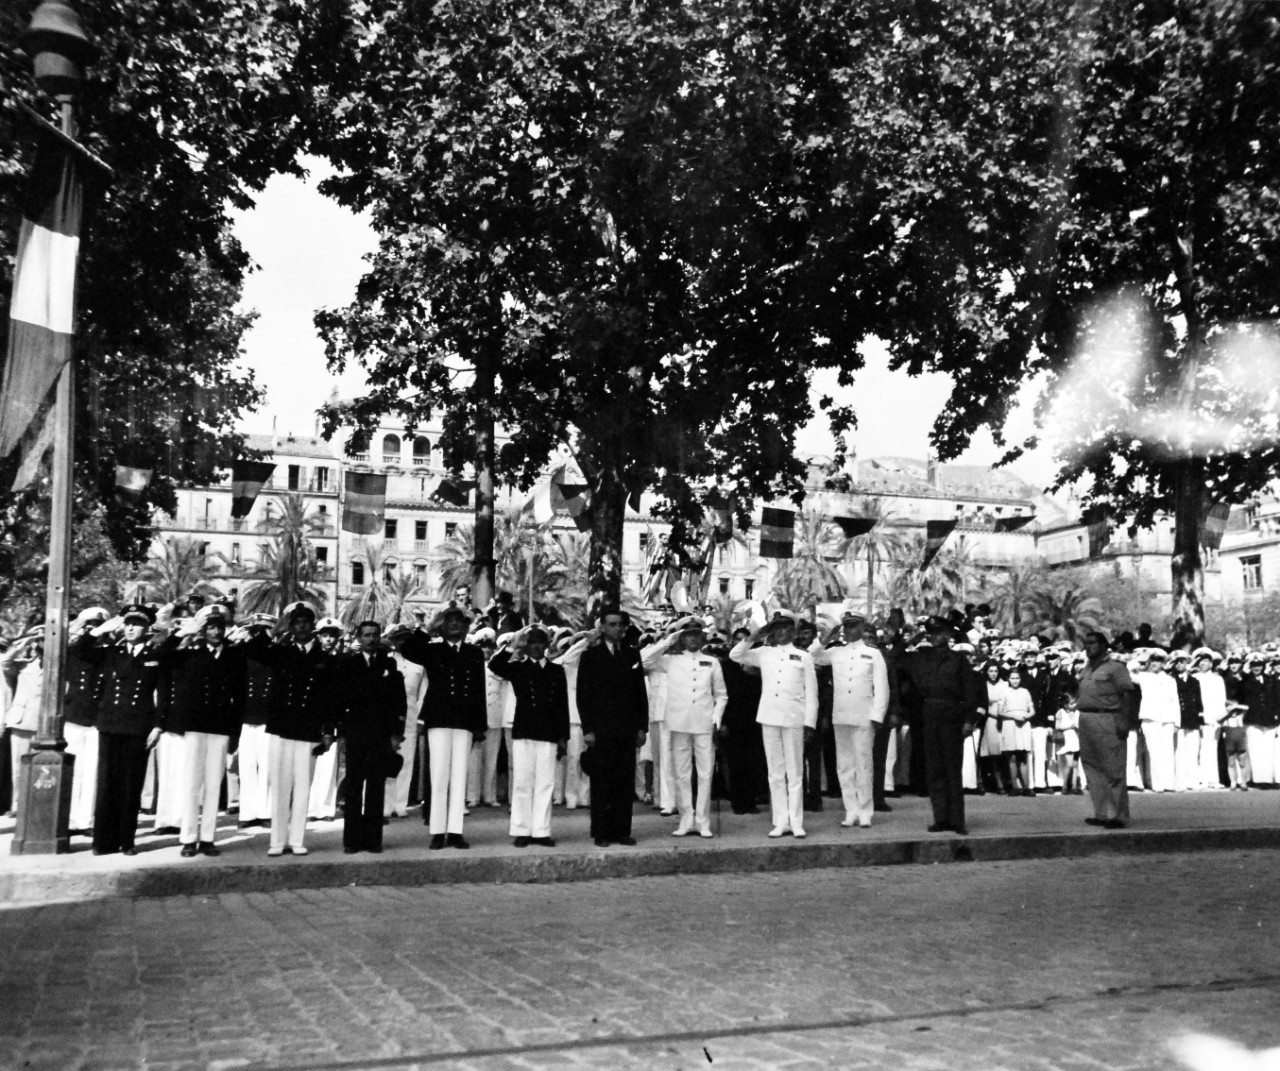 80-G-364102:   Invasion of Southern France, Toulon, August-September 1944.   Allied Naval Commanders of the Mediterranean join in victory celebration at Toulon, France, 14 September 1944.  Salute to colors, left to right:  Director of Engineering, Kohn; Rear Admiral Janyard; Rear Admiral Auboyneau; M. Jacquinot, Secretary of Navy; Admiral Sir John H.B. Cunningham, RN; Vice Admiral H. Kent Hewitt, USN; and Rear Admiral Lyal A. Davidson.  Taken by crew of USS Catoctin (AGC-5).   Official U.S. Navy Photograph, now in the collections of the National Arcchives.    (2014/7/10).